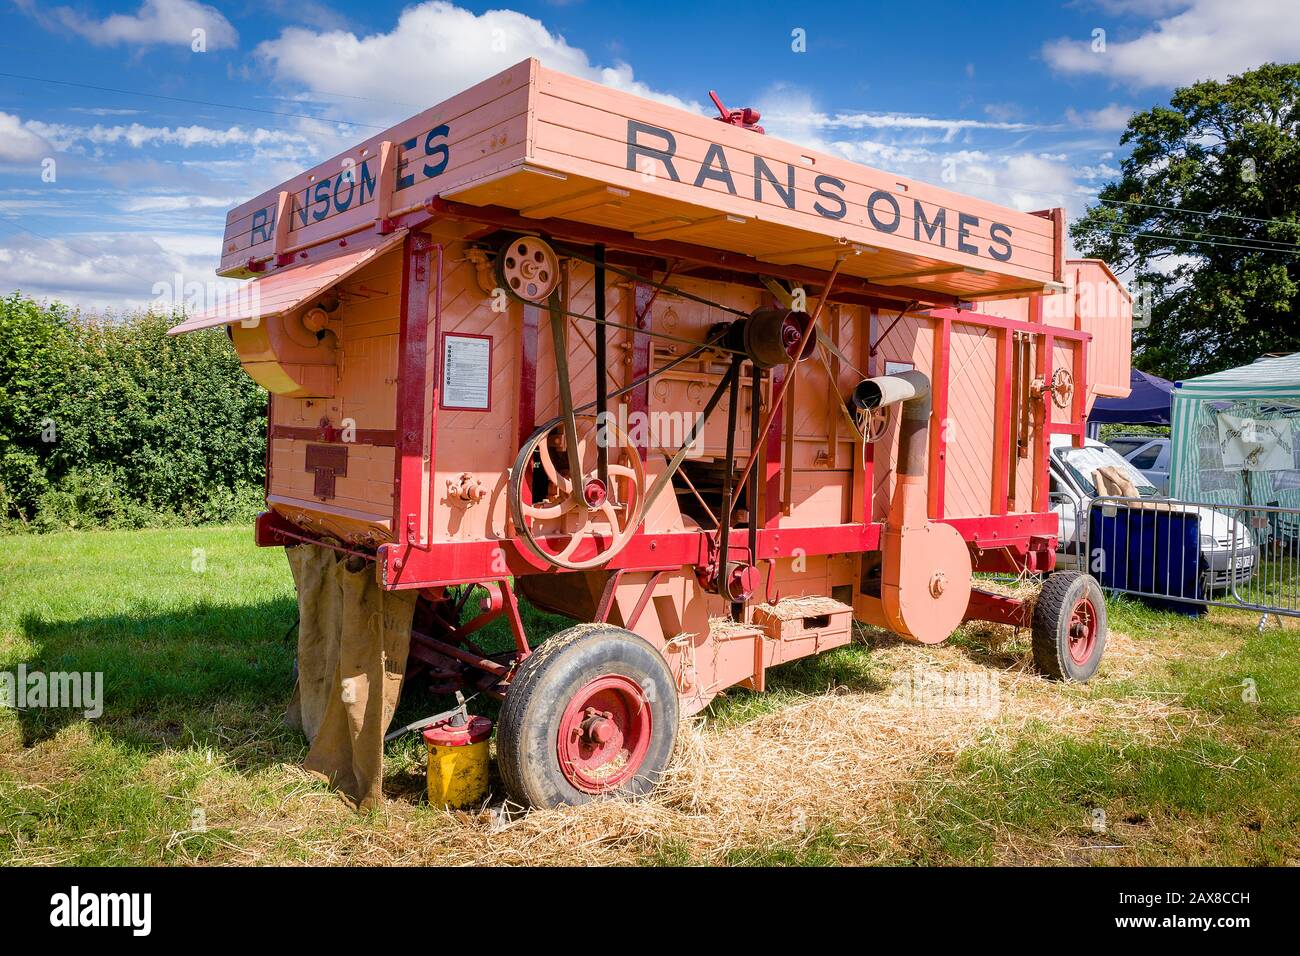 A 1950s Ransomes threshing machine restored and on display at Heddington Steam Fair and Courntry Show UK Stock Photo